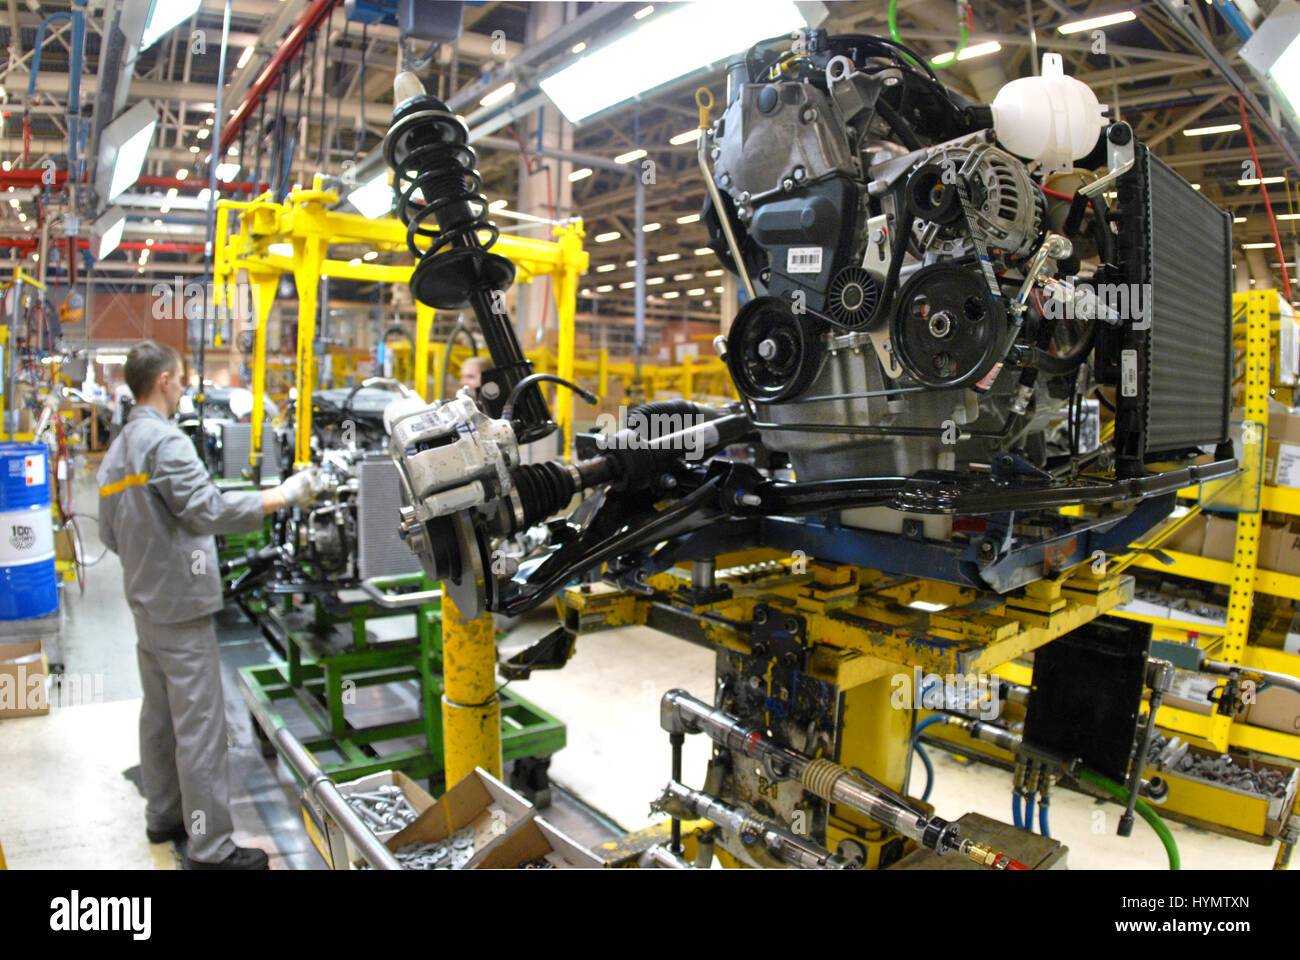 New manufactured engines on assembly line in a factory. Stock Photo